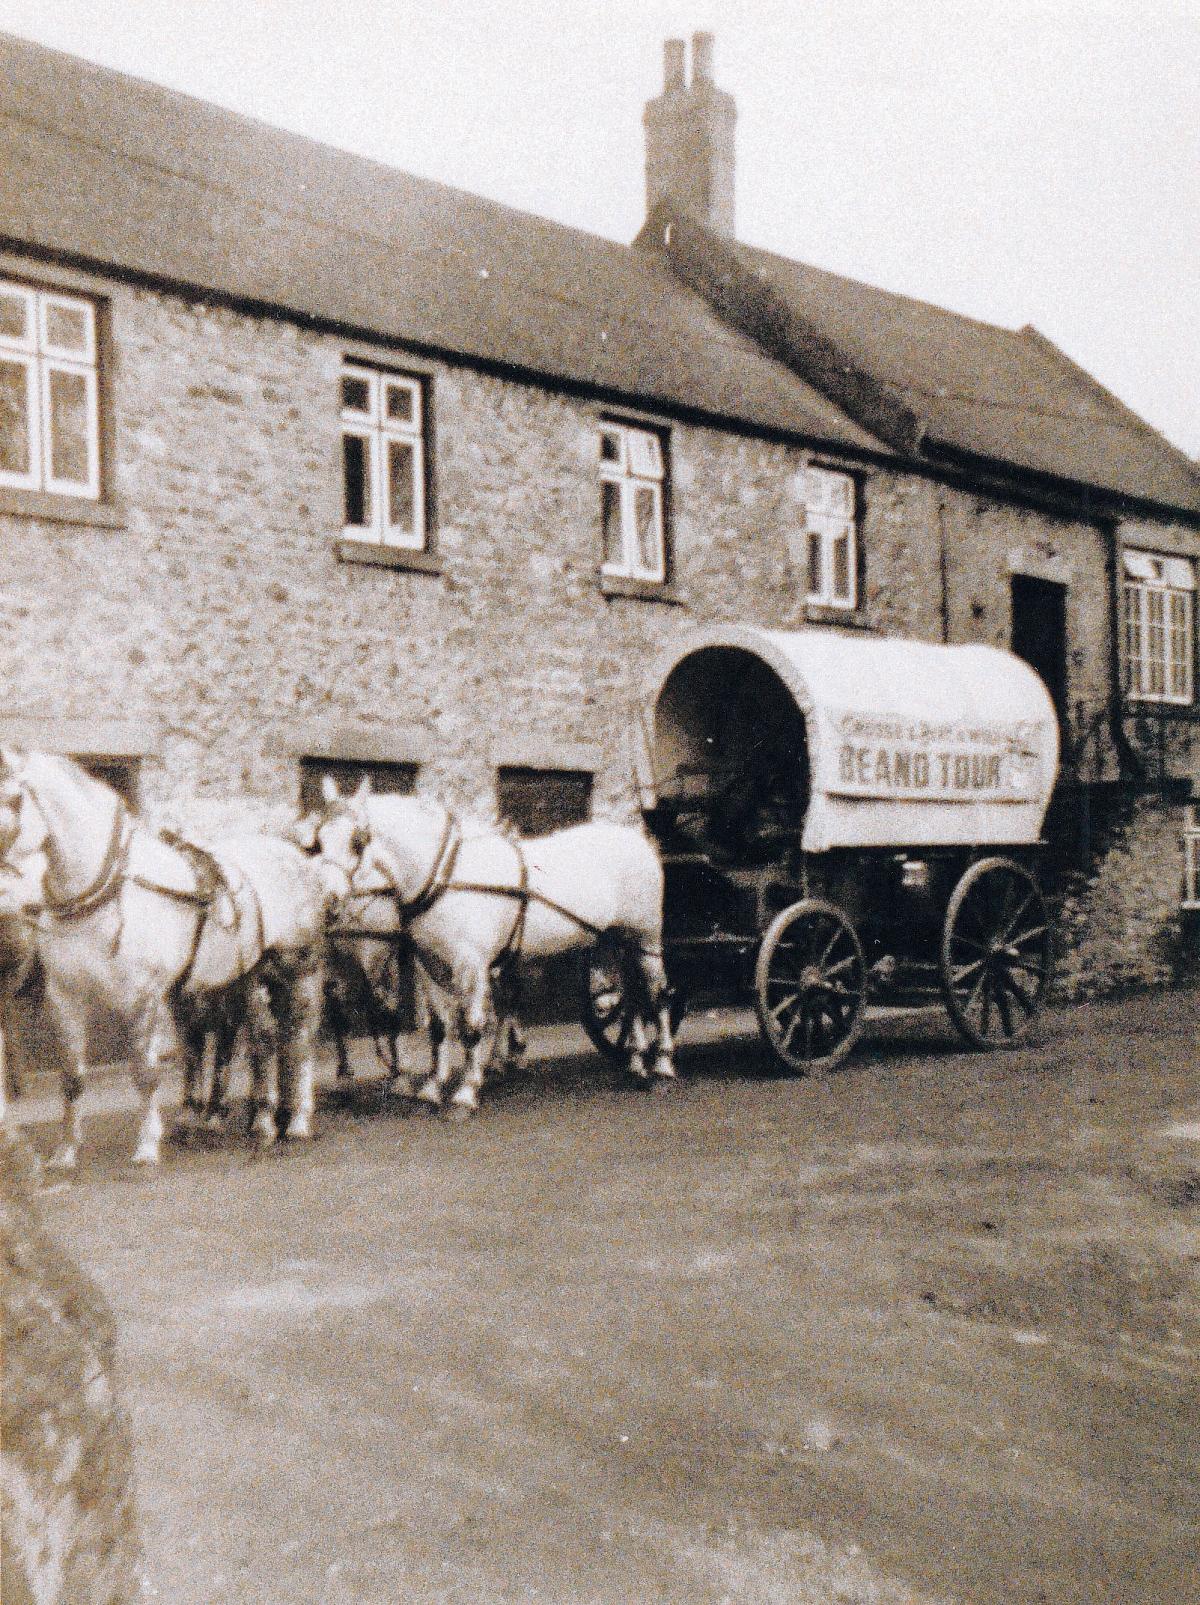 An unusual sight in a British village, a U.S.-style covered
wagon and accompanying horses. The wagon, accompanied by fake cowboys, was part of a promotional campaign for baked beans: The Crosse and Blackwell Beano Tour